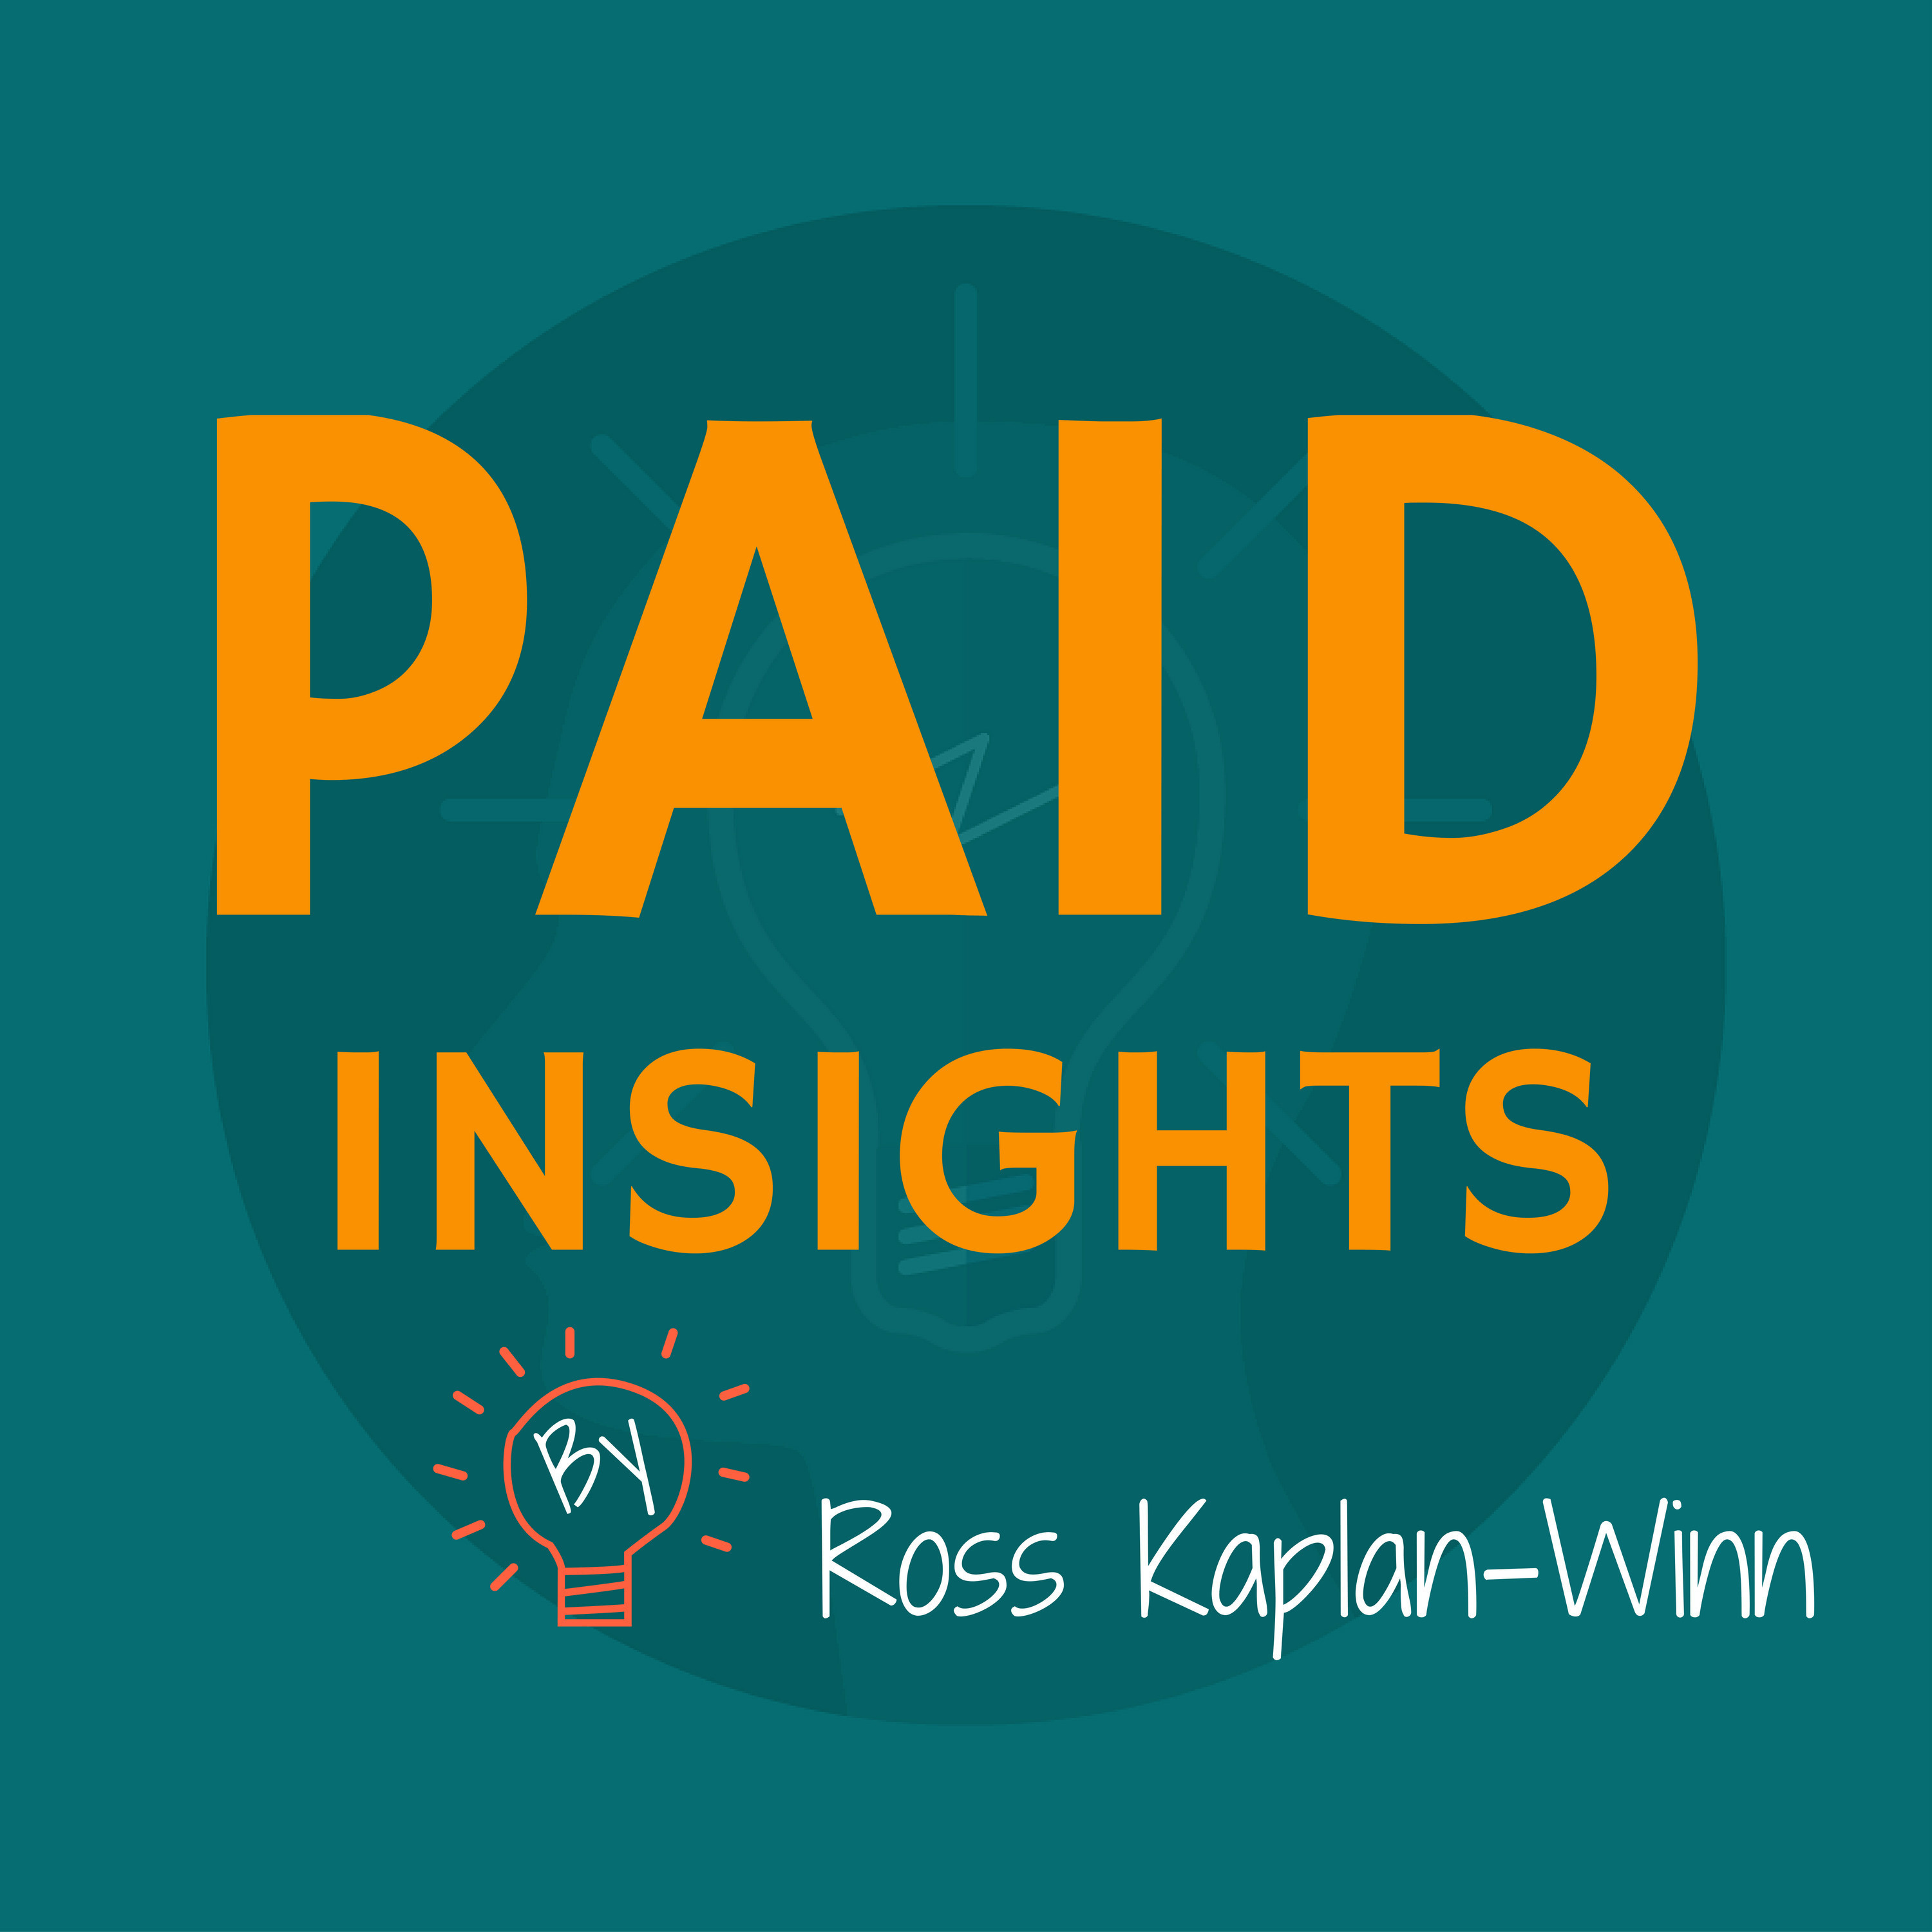 Paid Insights Podcast: Where We Deconstruct AdWords Ad Campaigns To Learn From Other Companies Mista